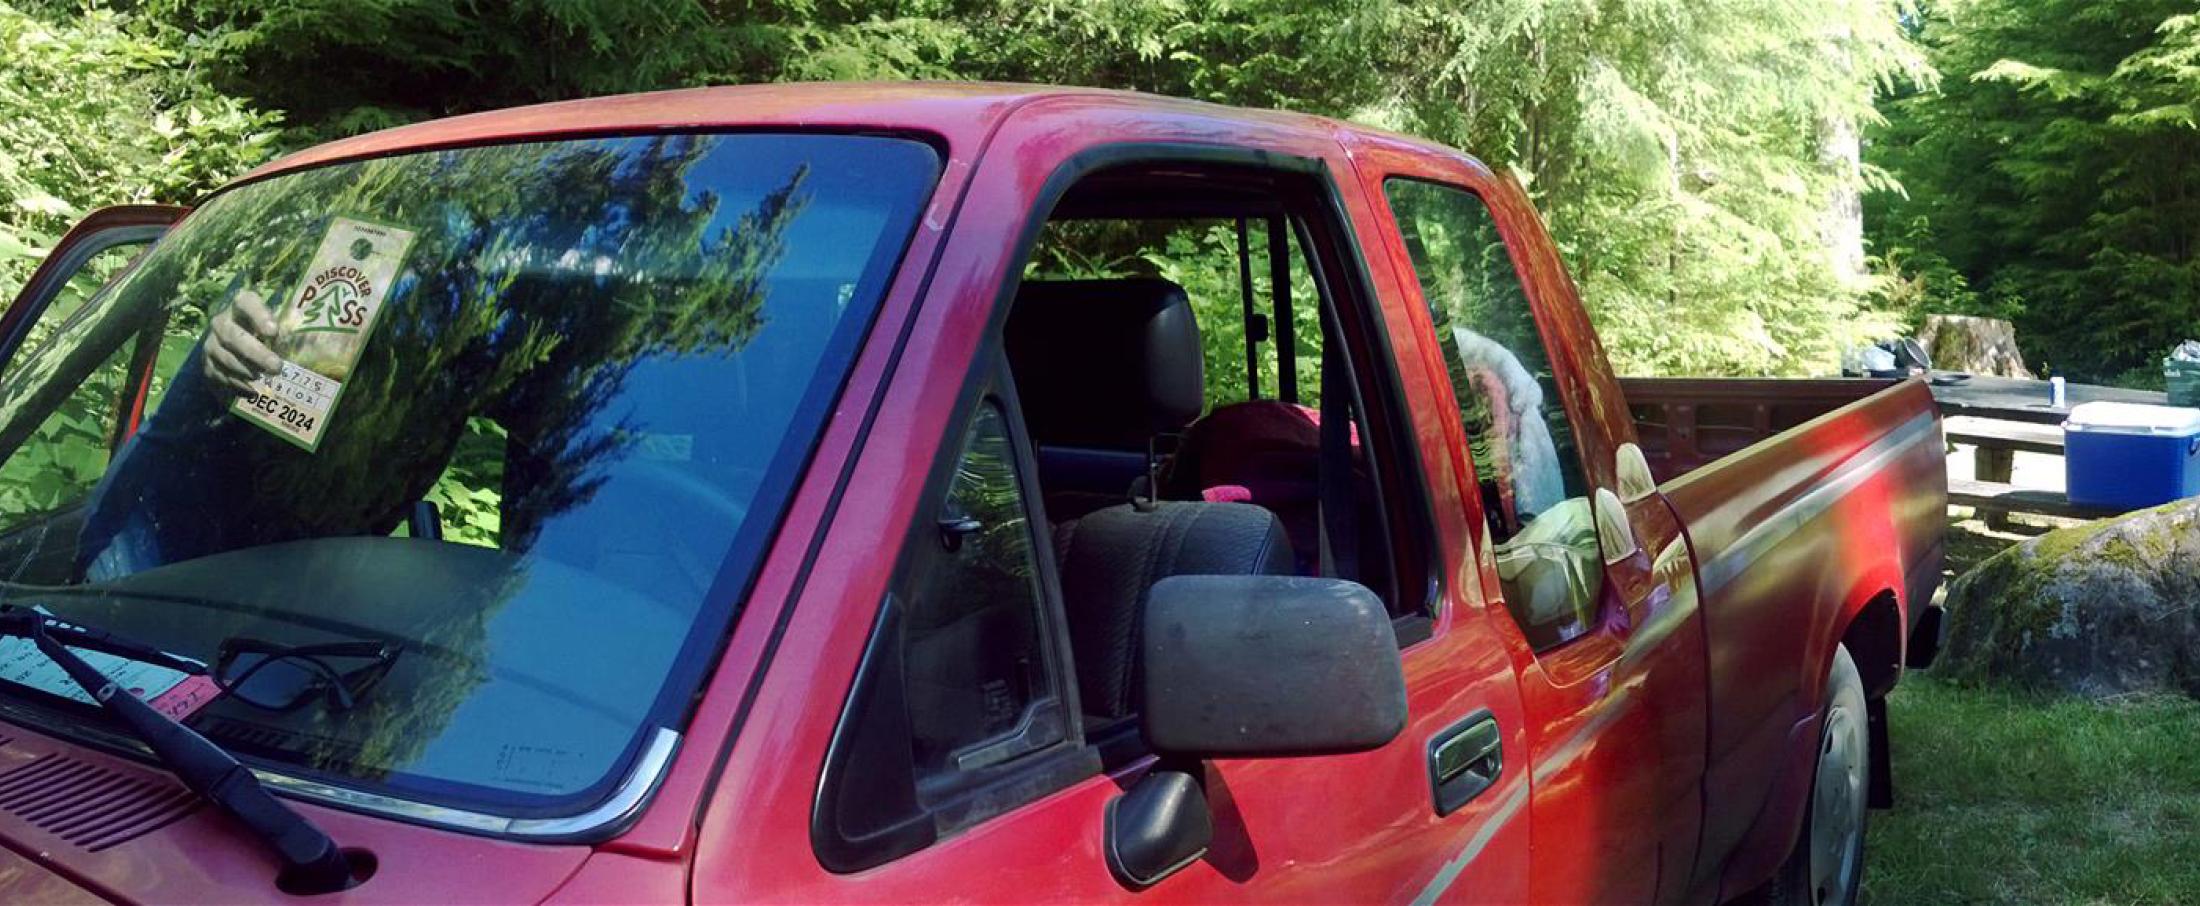 A red truck parked in a campsite. Inside the truck a person is hanging a Discover Pass on the rear view mirror. In the background are trees and a picnic table with a blue cooler sitting on it.